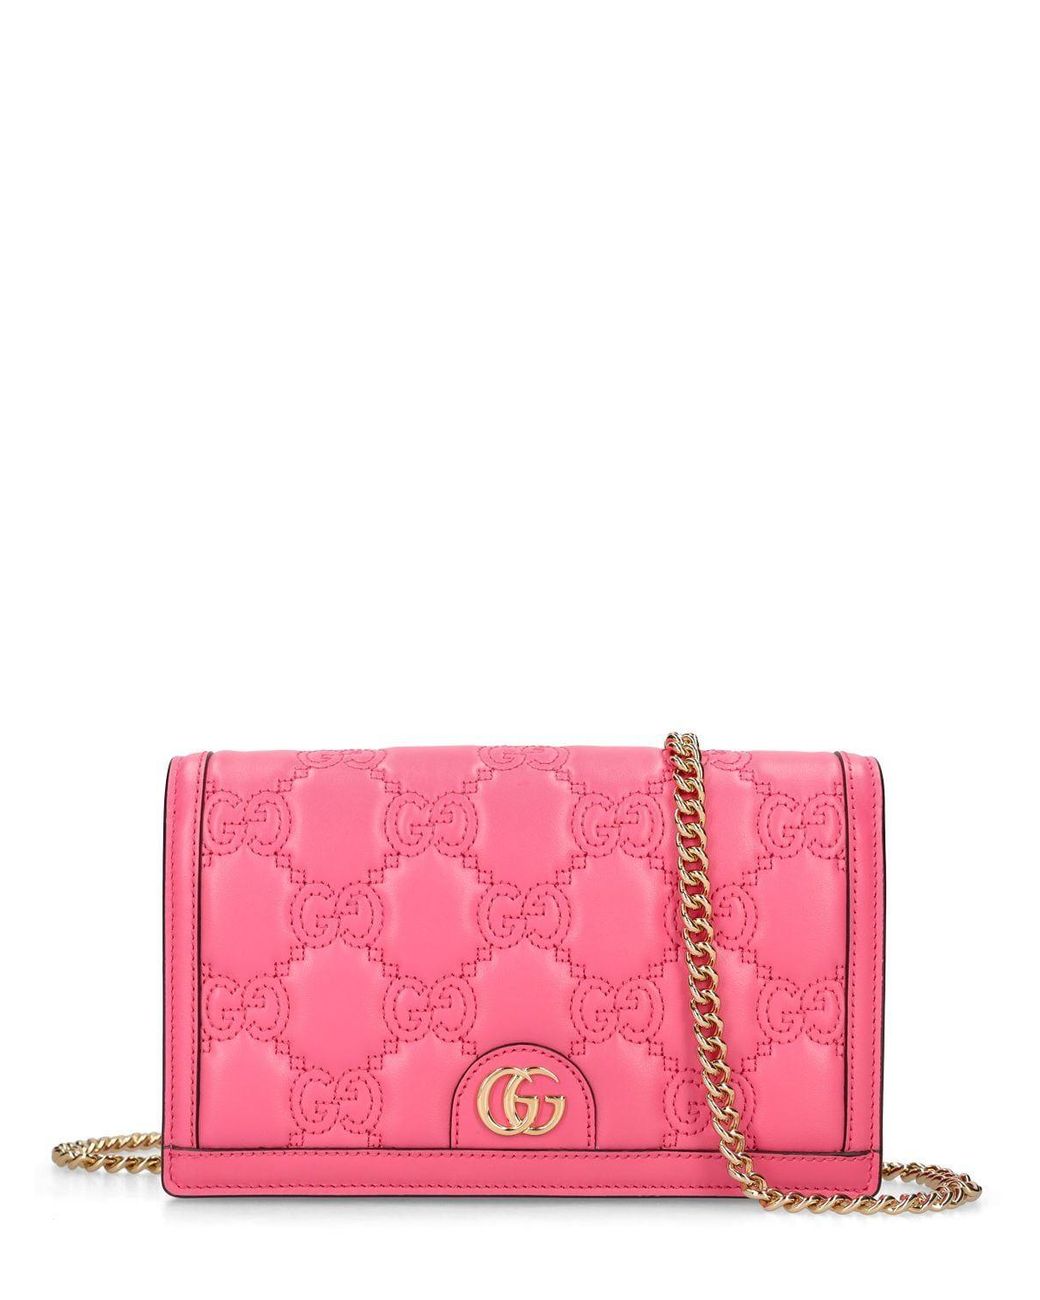 Gucci gg Matelassé Leather Wallet Bag W/chain in Pink | Lyst